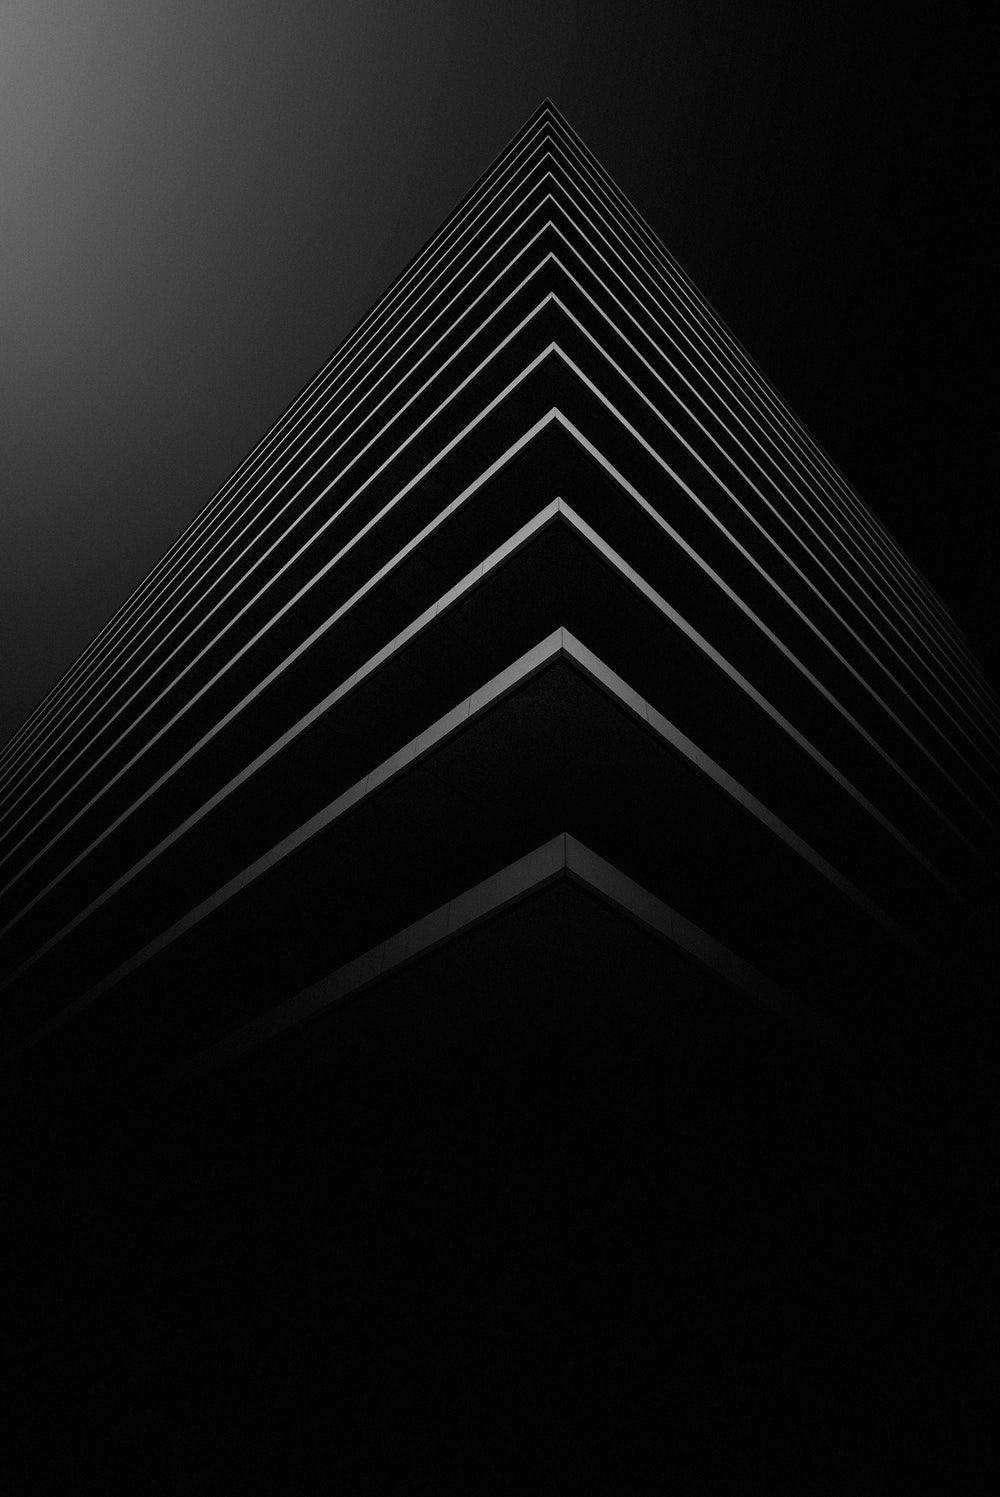 Black and White Triangle Logo - Triangle Picture [HD]. Download Free Image